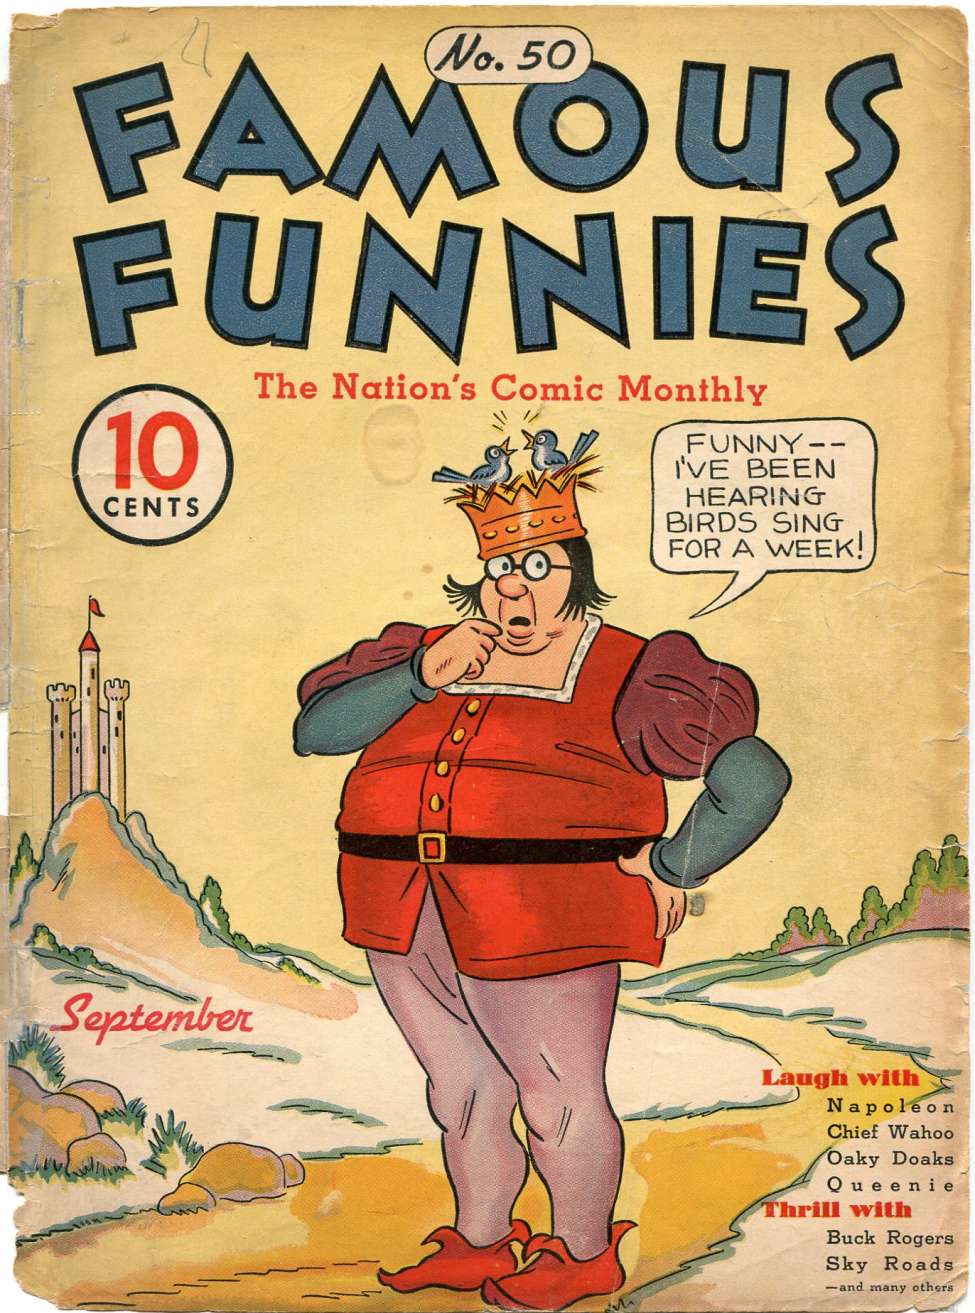 Book Cover For Famous Funnies 50